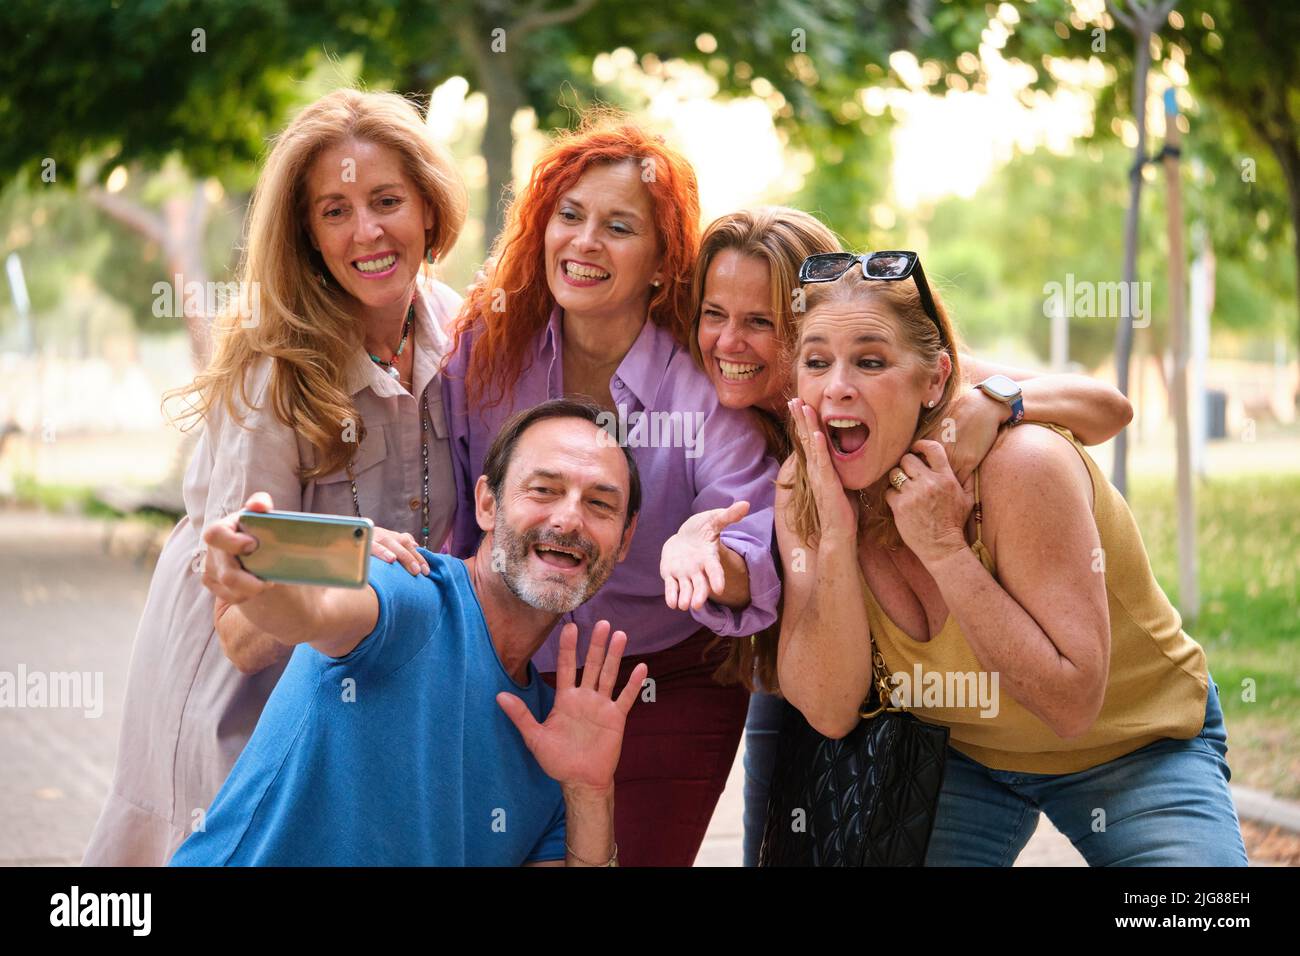 Five mature adults taking a selfie and having fun in a park. Stock Photo